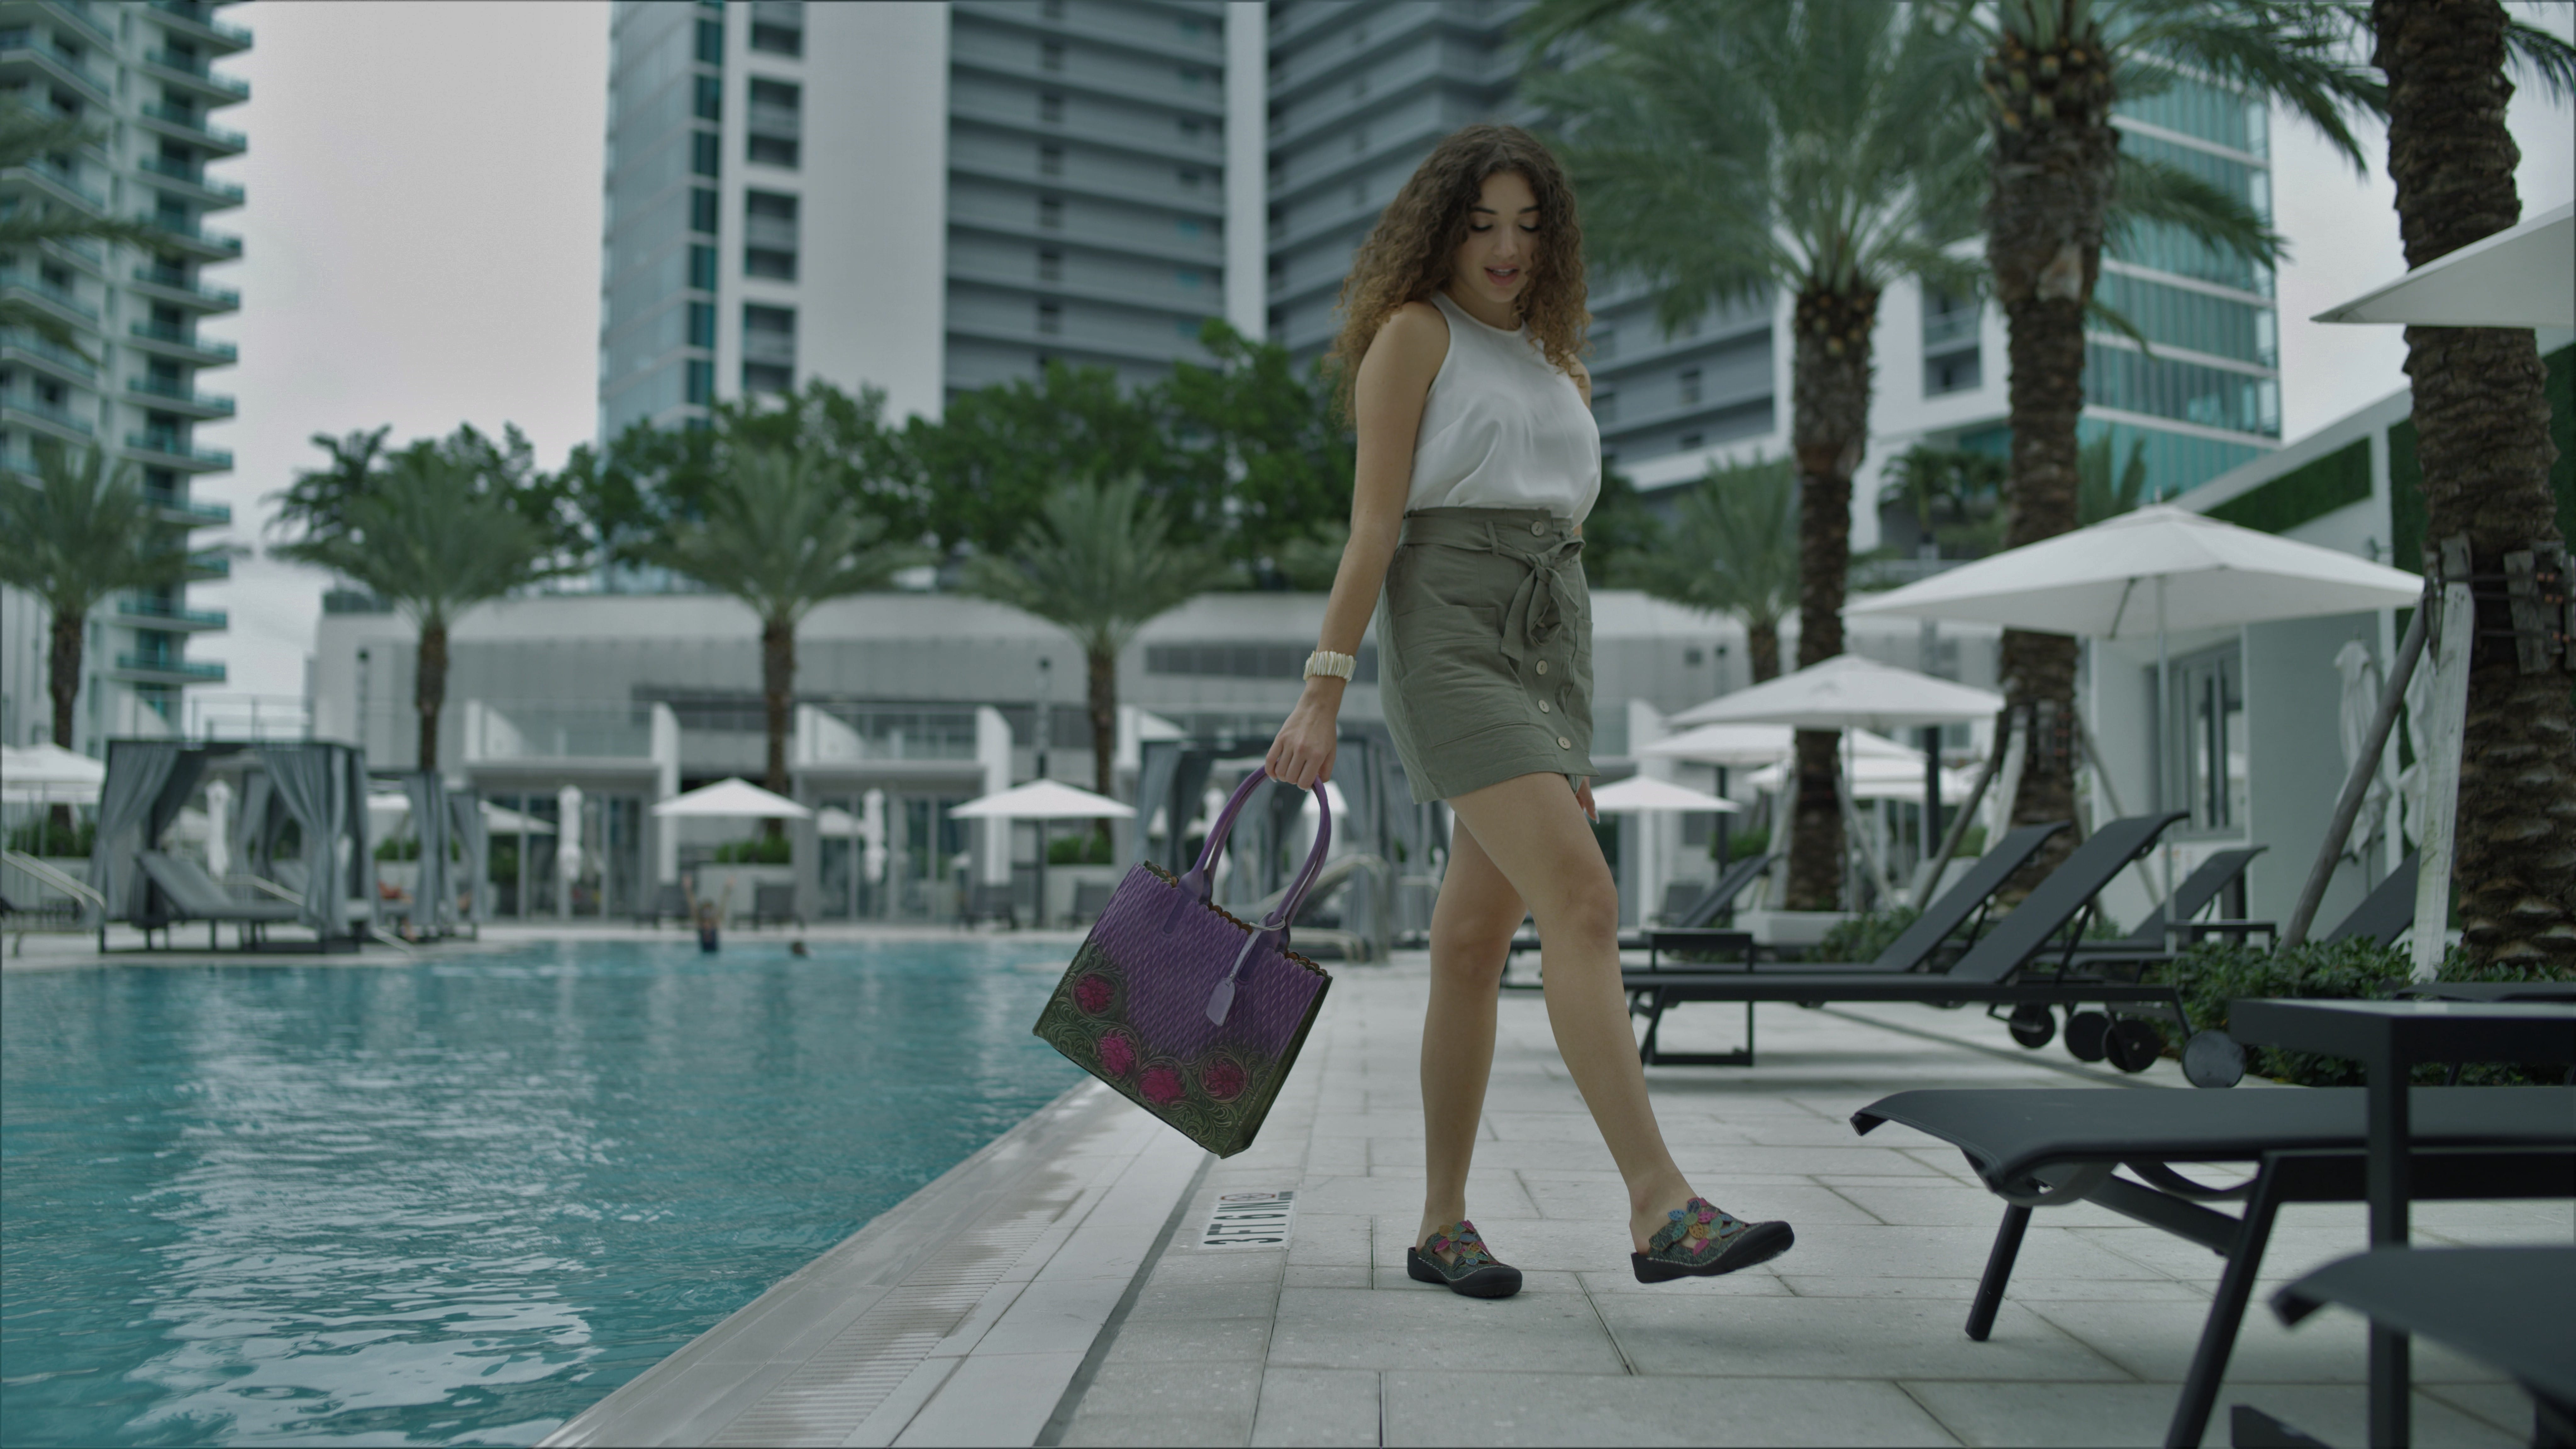 Spring StepLartiste Kalria Side profile of woman wearing white dress top, olive green shorts carrying a purple purse walking by a pool with black lounge chairs and patio umbrellas nearby